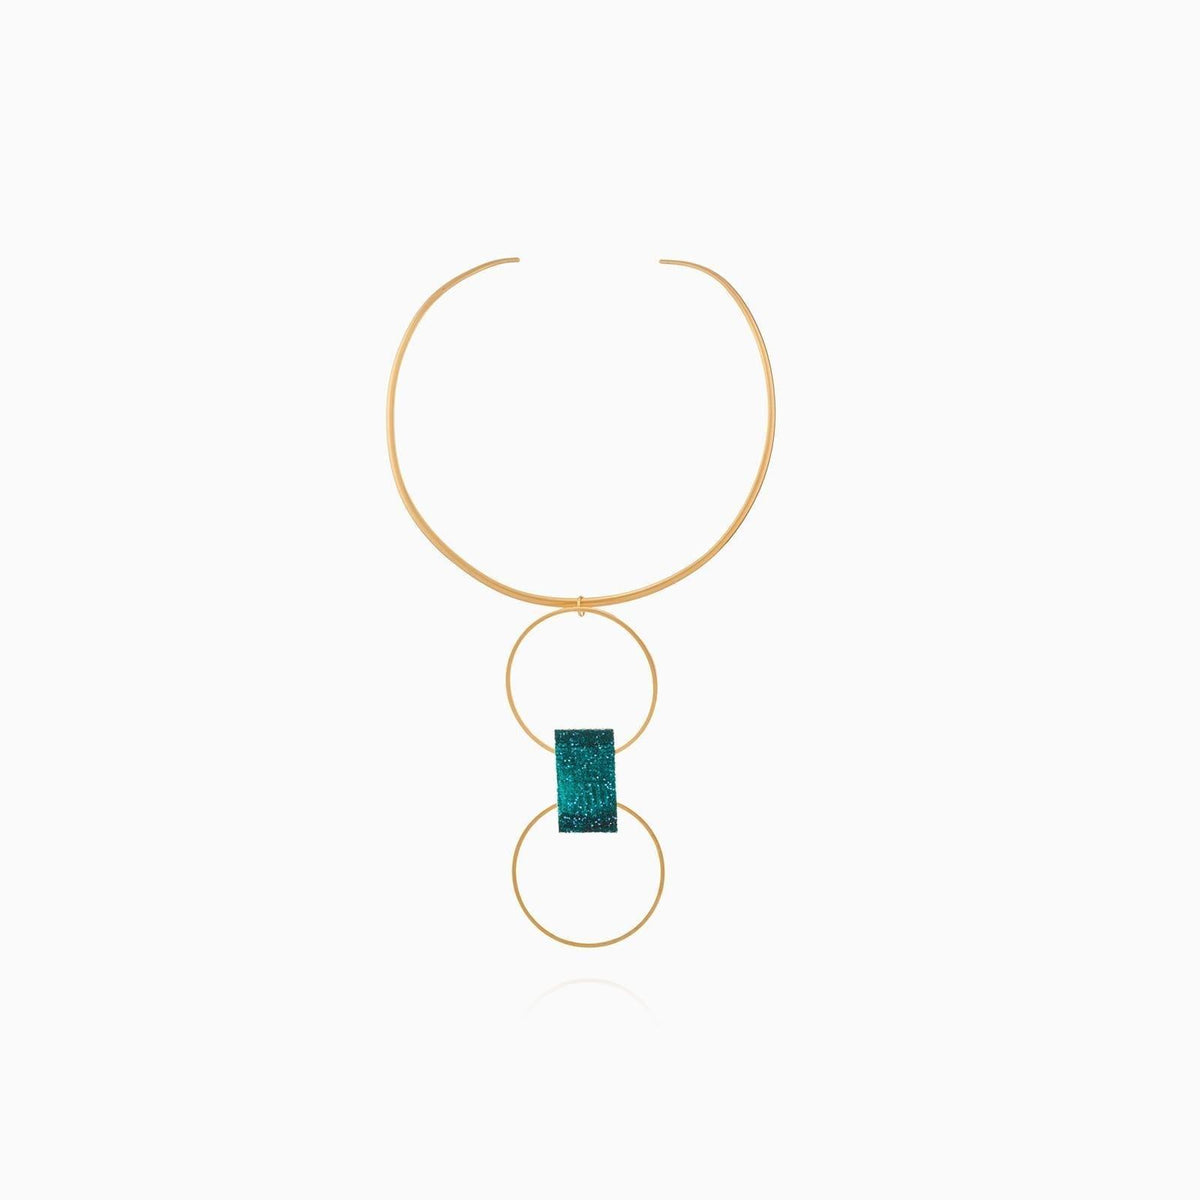 Join Gold Necklace - Vita Isola